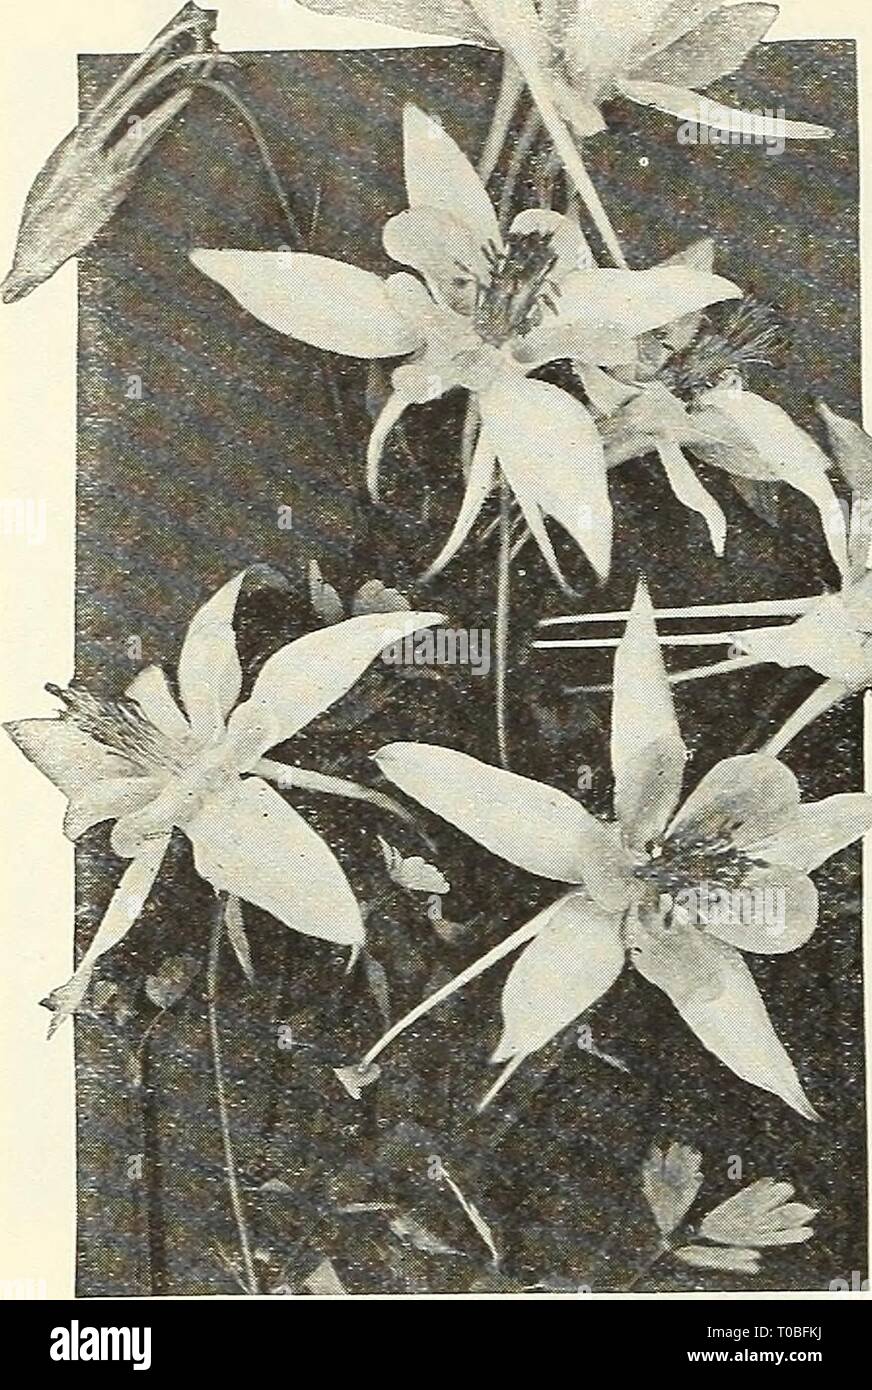 Dreer's garden book 1923 (1923) Dreer's garden book 1923 dreersgardenbook1923henr Year: 1923  66 /flEHEyABREEll^ RELIABLE FL0WEK SEEM i ^M:-    Dreer's Long-spurred Aquilegia (Columbine) ARABIS (Rock Cress) PER PKT. 1211 Alpina. A hardy per- ennial and one of the earliest and prettiest spring flowers. The spreading tufts are cov- ered with a sheet of pure white flowers as soon as the snow dis- appears. Unequalled for rockeries or edging; with- stands the drought and is always neat; 6 inches, i oz., 25 cts SO 10 AQUILEGIA (Columbine) No hardy plant grown from sccd is more easily handled than th Stock Photo